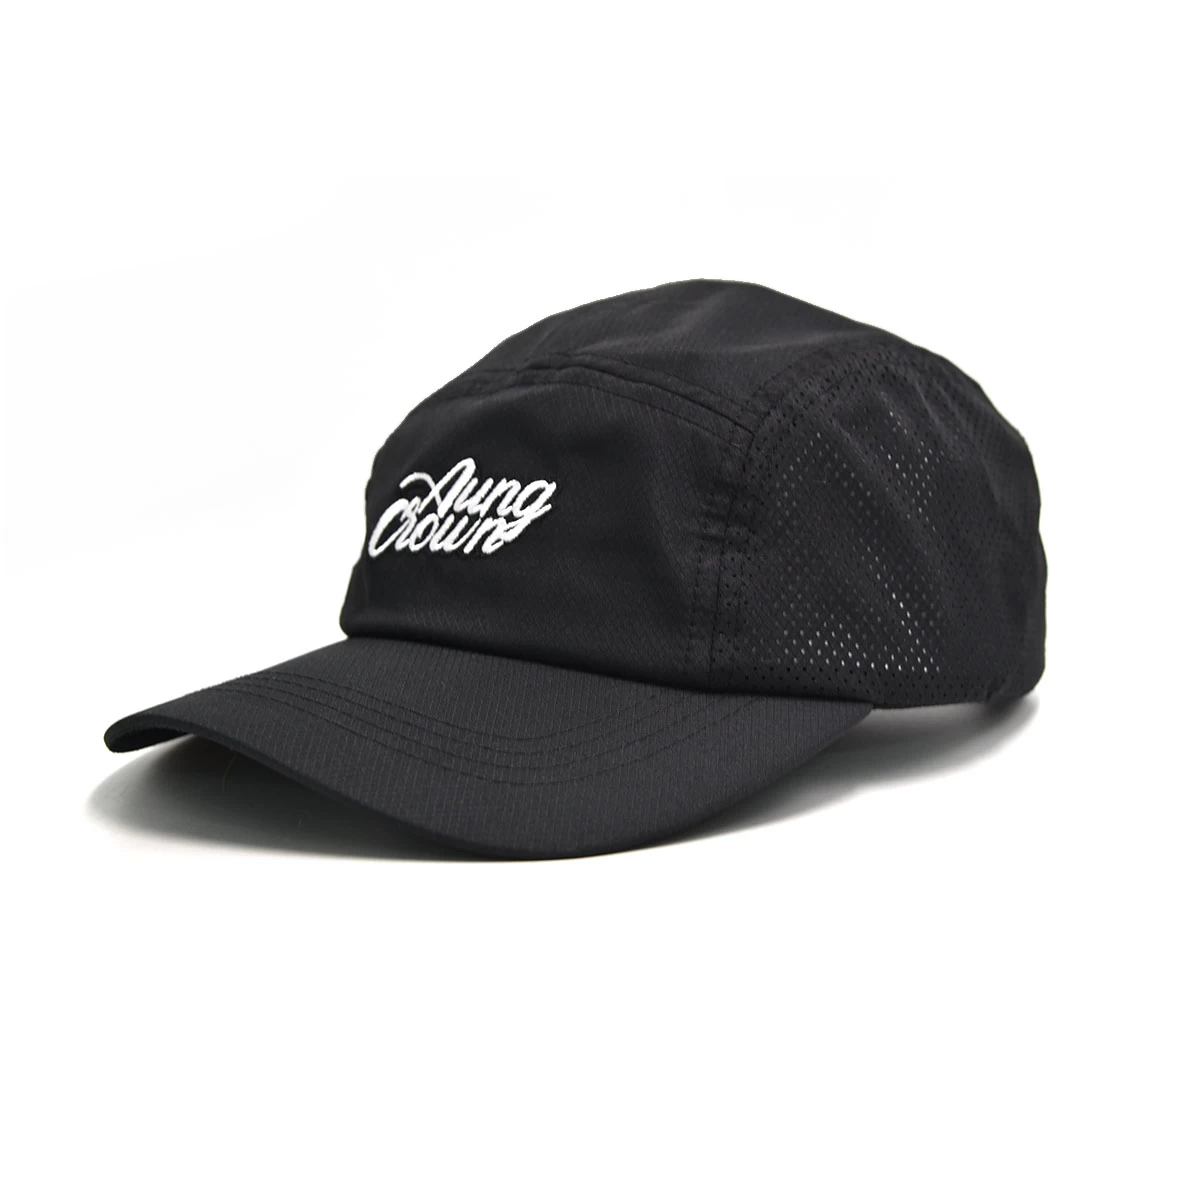 aungcrown embroidery logo black quick-drying fabric sports caps